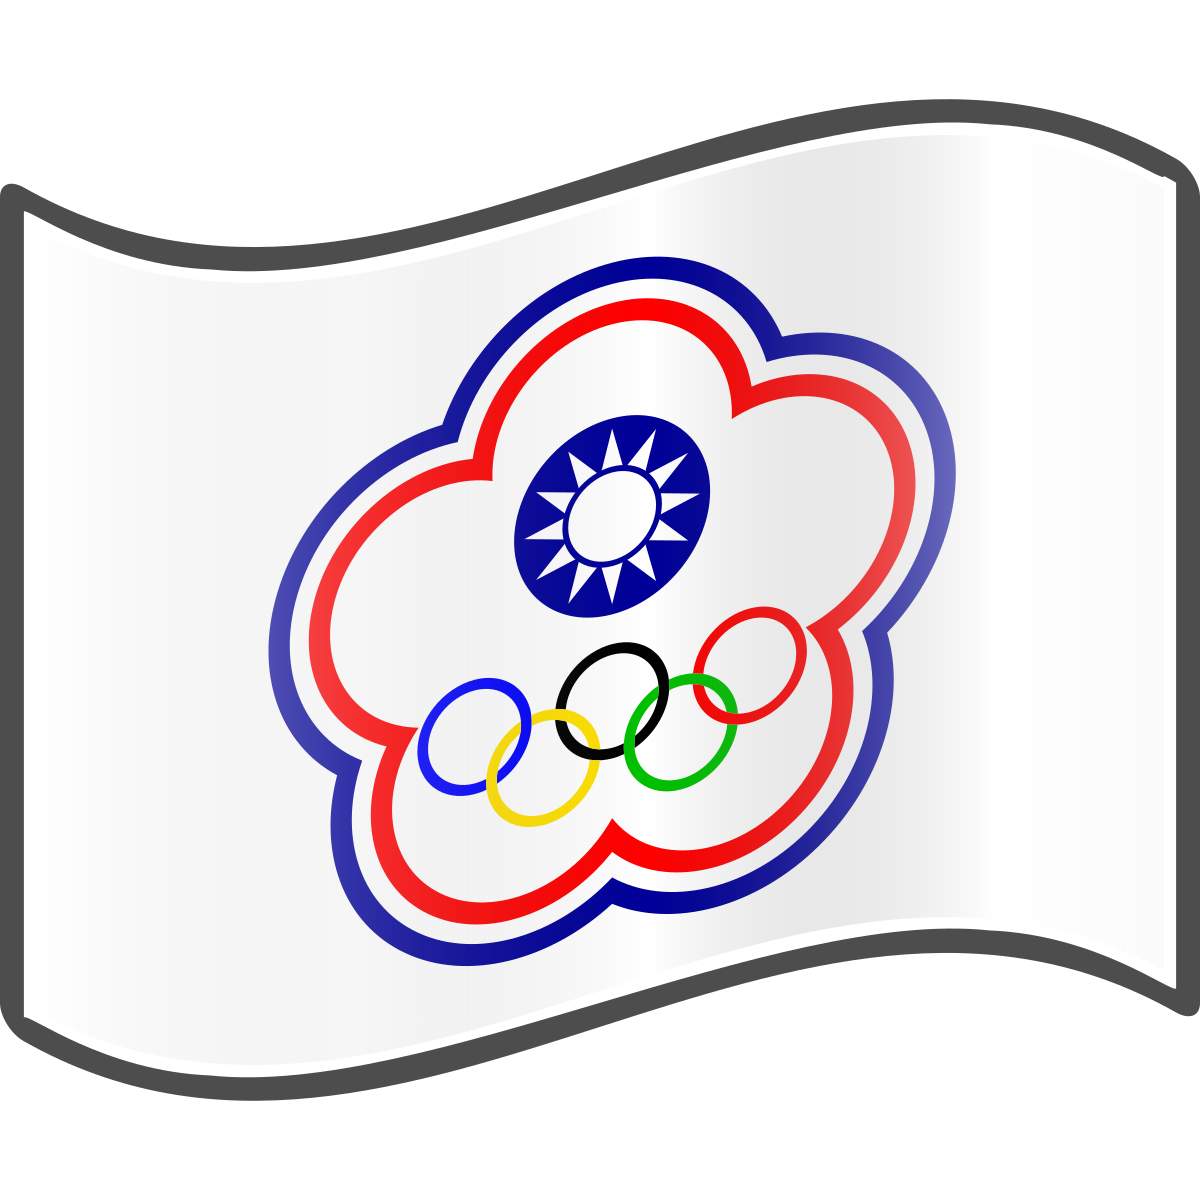 Download File:Nuvola Chinese Taipei Olympic flag.svg - Wikimedia ...